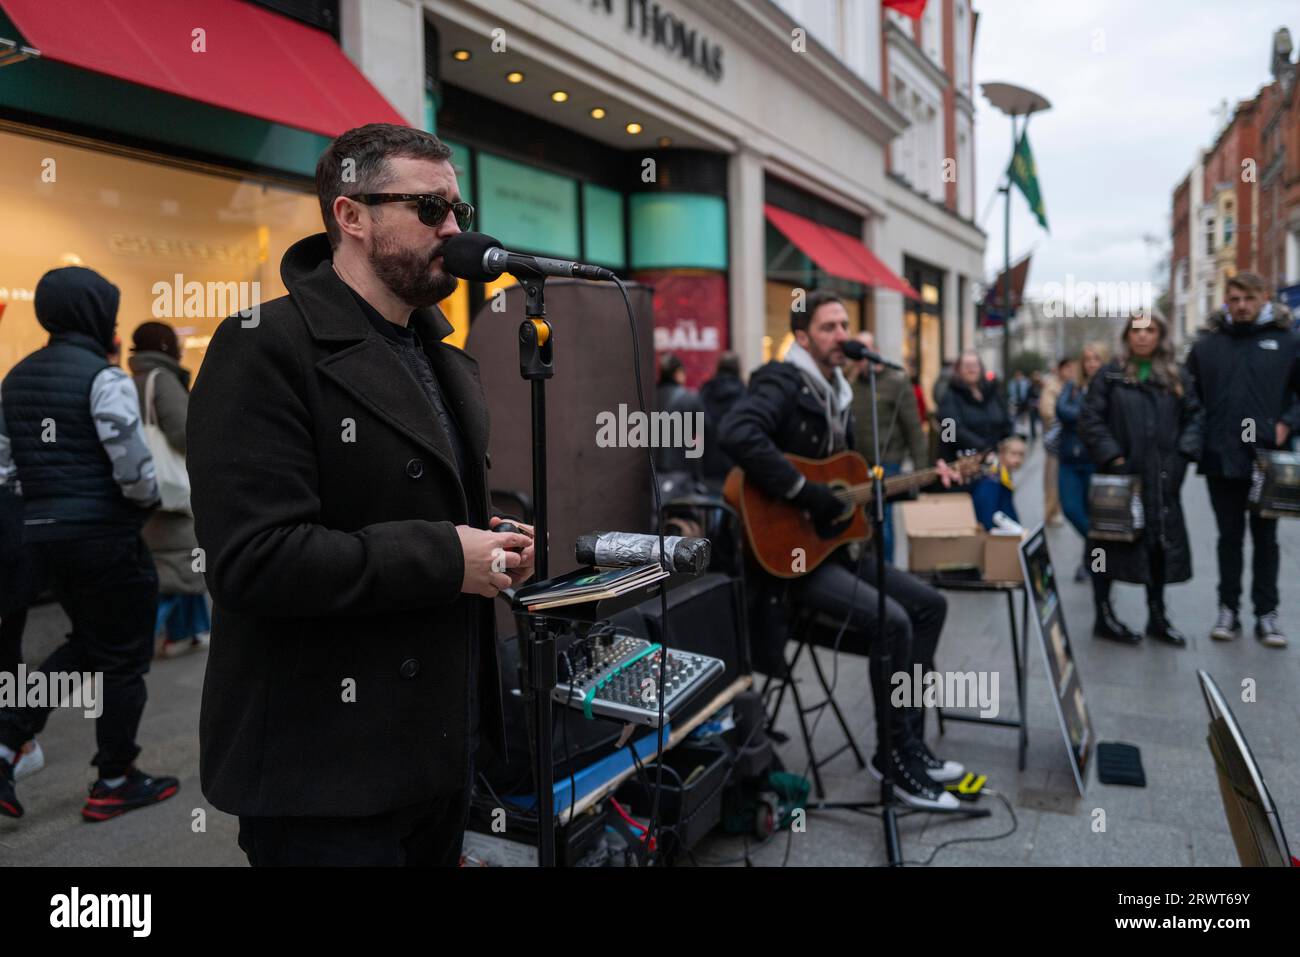 Andrew Kavanagh of Irish group Keywest singing in Grafton street with Andrew Glover in the back ground. Dublin, Ireland, Europe Stock Photo